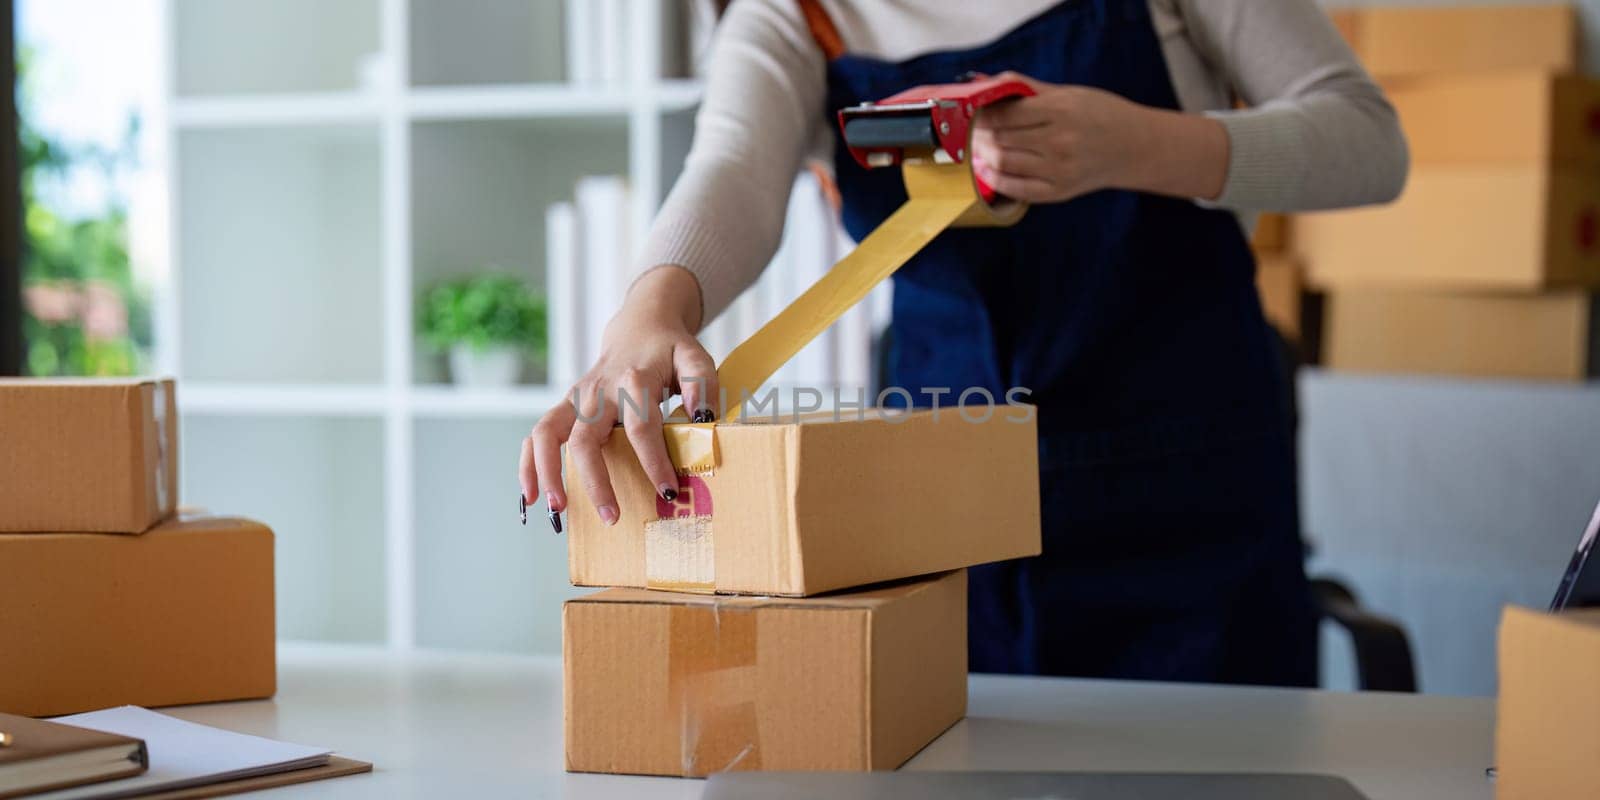 Woman use scotch tape to attach parcel box to prepare goods for the process of packaging, shipping, online sale internet marketing ecommerce concept startup business idea.